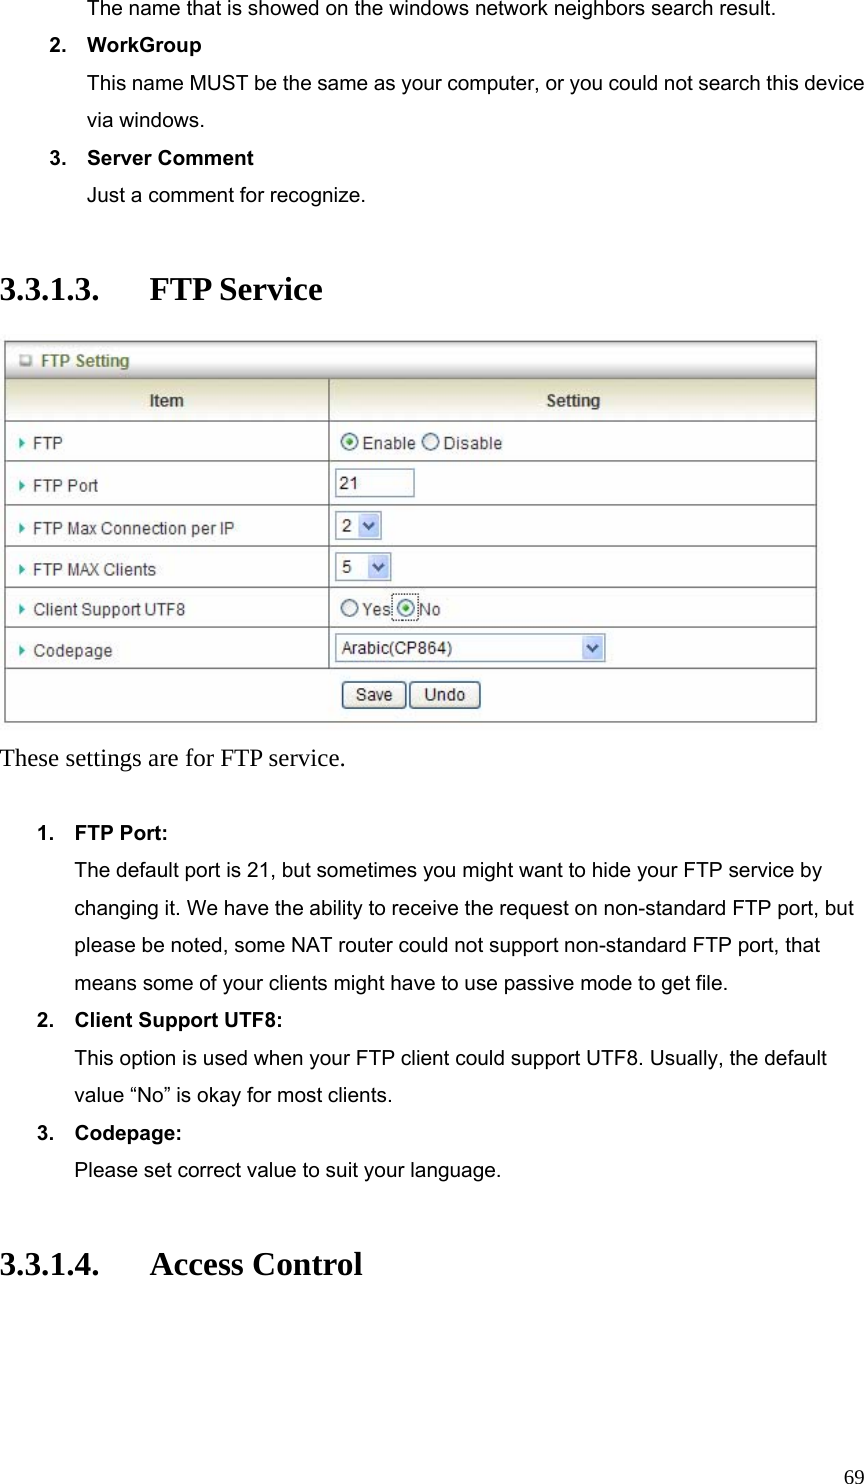  69The name that is showed on the windows network neighbors search result. 2. WorkGroup This name MUST be the same as your computer, or you could not search this device via windows. 3. Server Comment Just a comment for recognize.  3.3.1.3. FTP Service  These settings are for FTP service.  1. FTP Port: The default port is 21, but sometimes you might want to hide your FTP service by changing it. We have the ability to receive the request on non-standard FTP port, but please be noted, some NAT router could not support non-standard FTP port, that means some of your clients might have to use passive mode to get file. 2.  Client Support UTF8: This option is used when your FTP client could support UTF8. Usually, the default value “No” is okay for most clients. 3. Codepage: Please set correct value to suit your language.  3.3.1.4. Access Control 